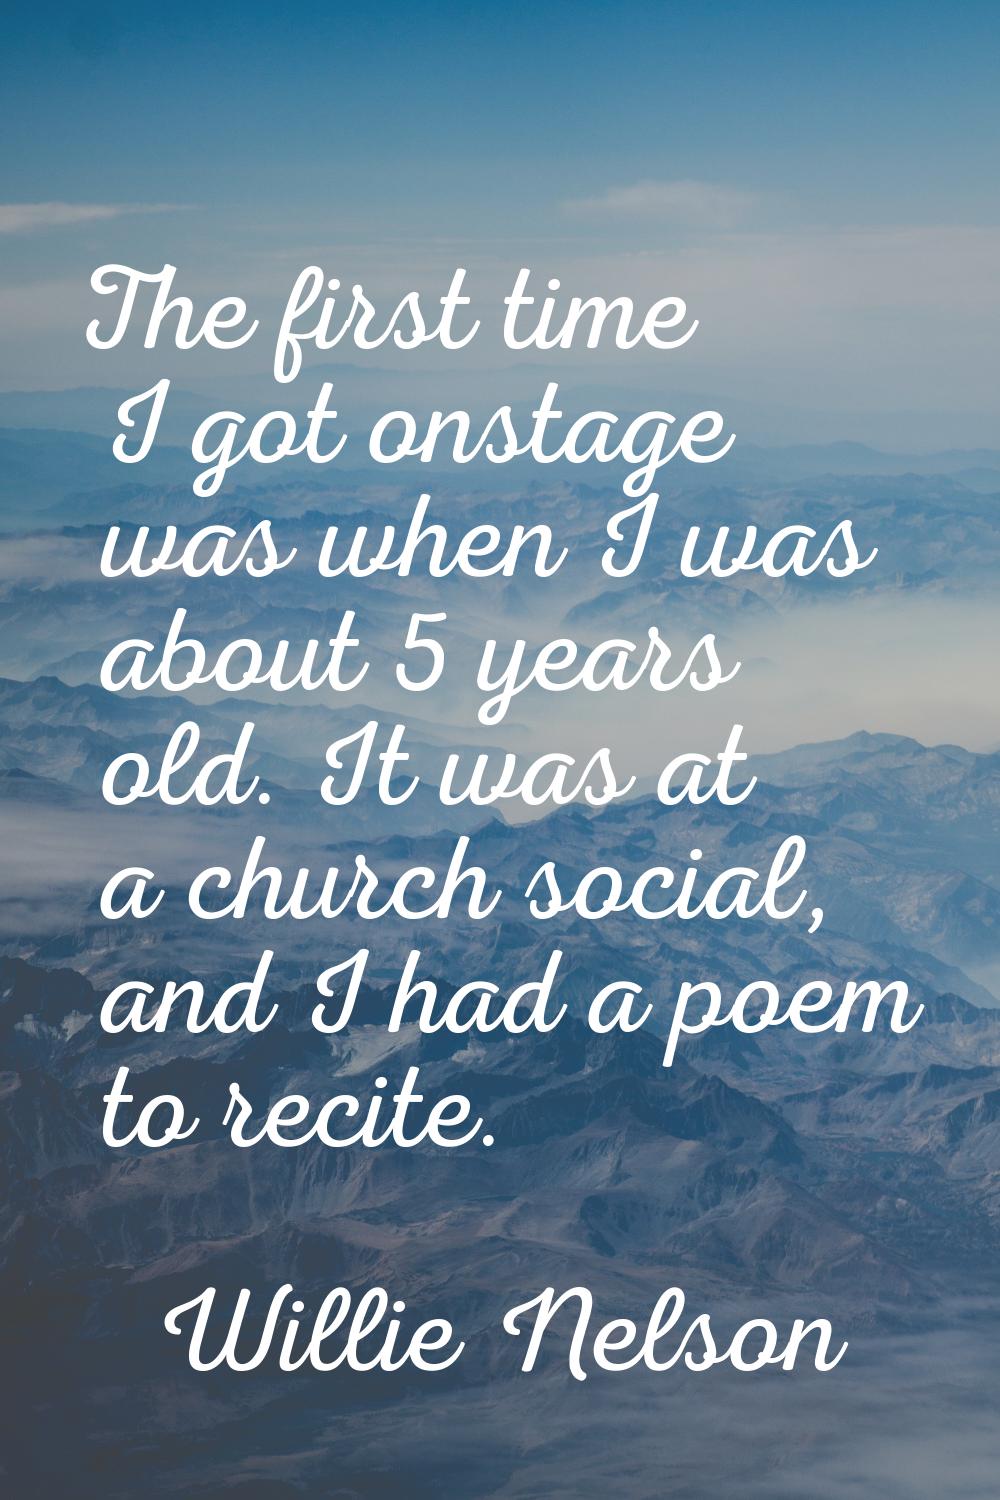 The first time I got onstage was when I was about 5 years old. It was at a church social, and I had